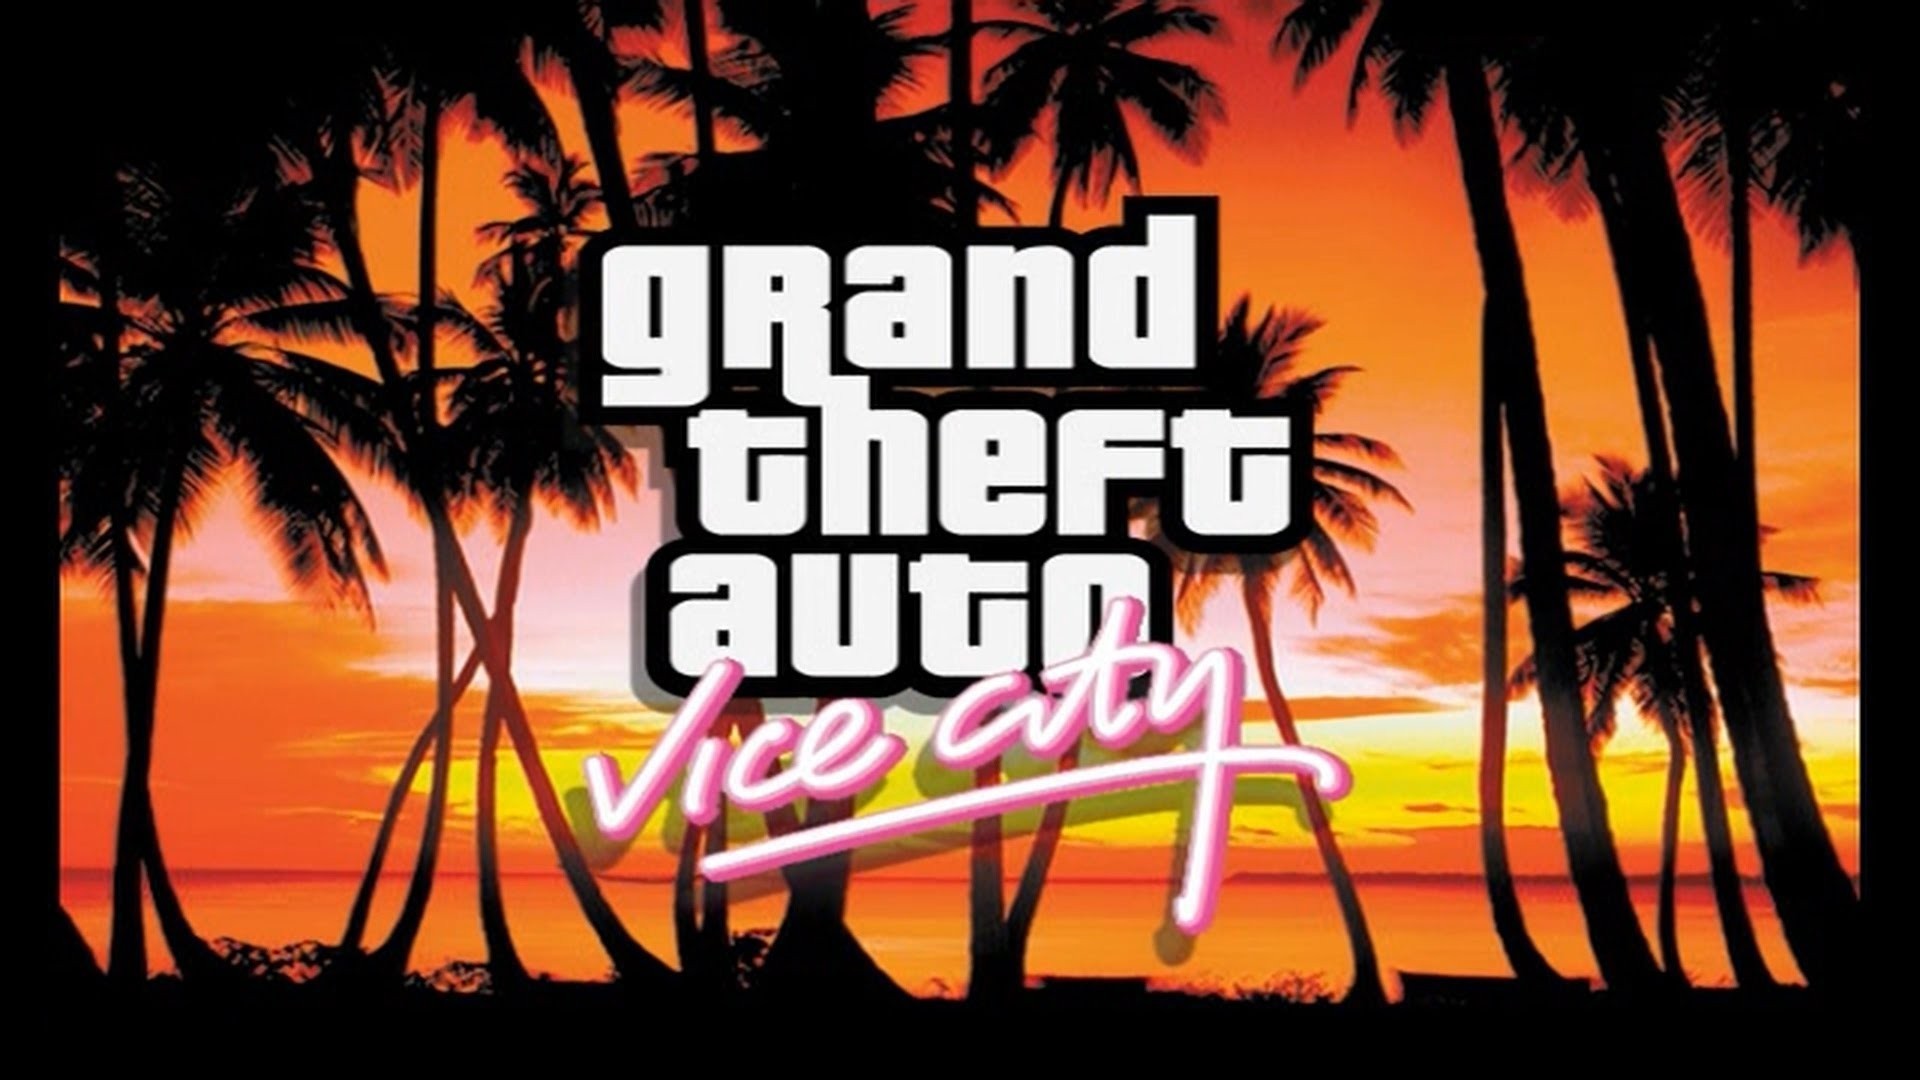 1920x1080 Grand Theft Auto: Vice City Cheats and Codes for PC